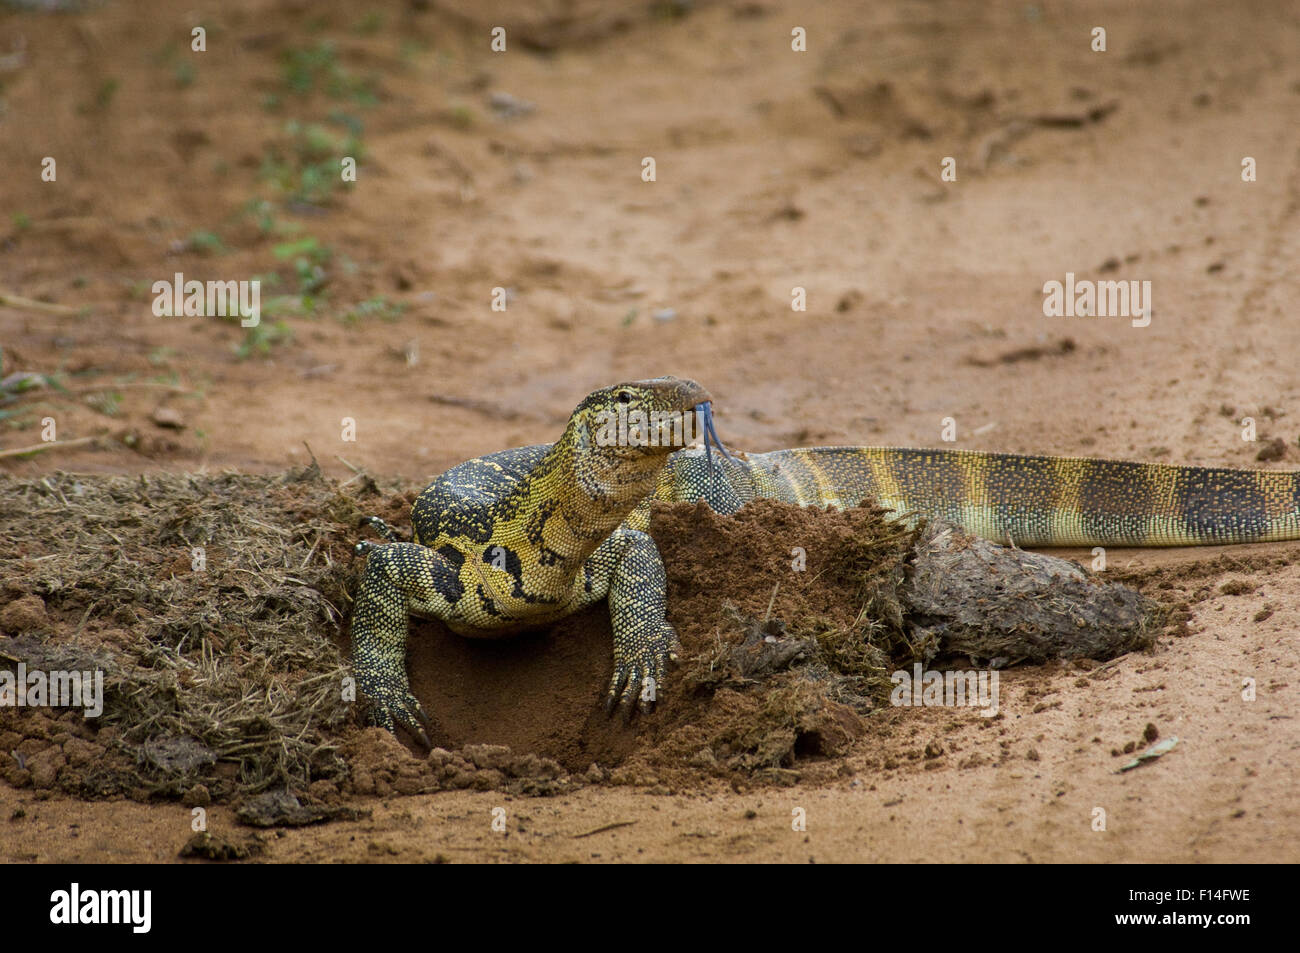 NILE MONITOR LIZARD BY HOLE IT DUG LOOKING FOR DUNG BEETLES FORKED TONGUE SHOWING Stock Photo